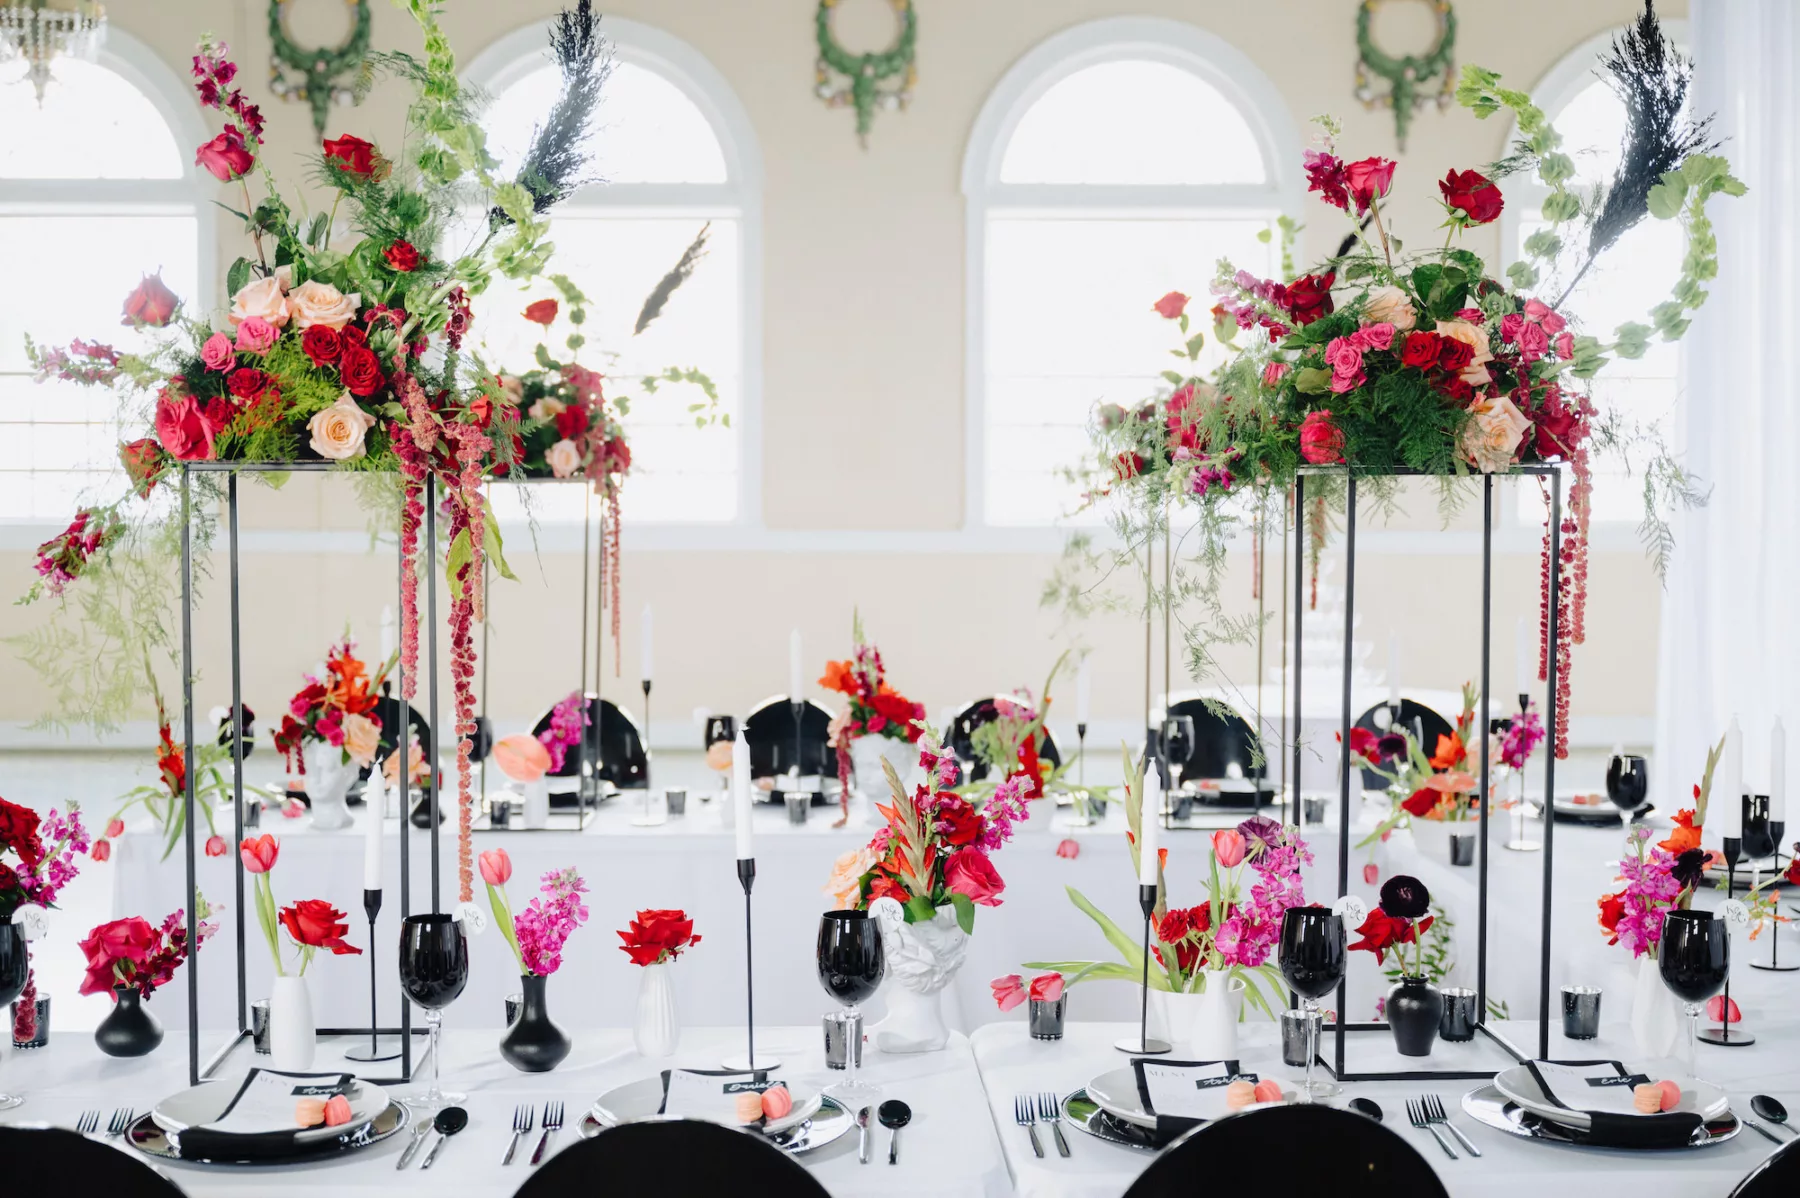 Modern Black and Pink Italian Inspired Wedding Reception | U-Shaped Table Setting | Greenery, Pink and Red Rose Flower Arrangement Decor Ideas | Tampa Bay Florist Save The Date Florida | Ybor Event Planner Eventfull Weddings